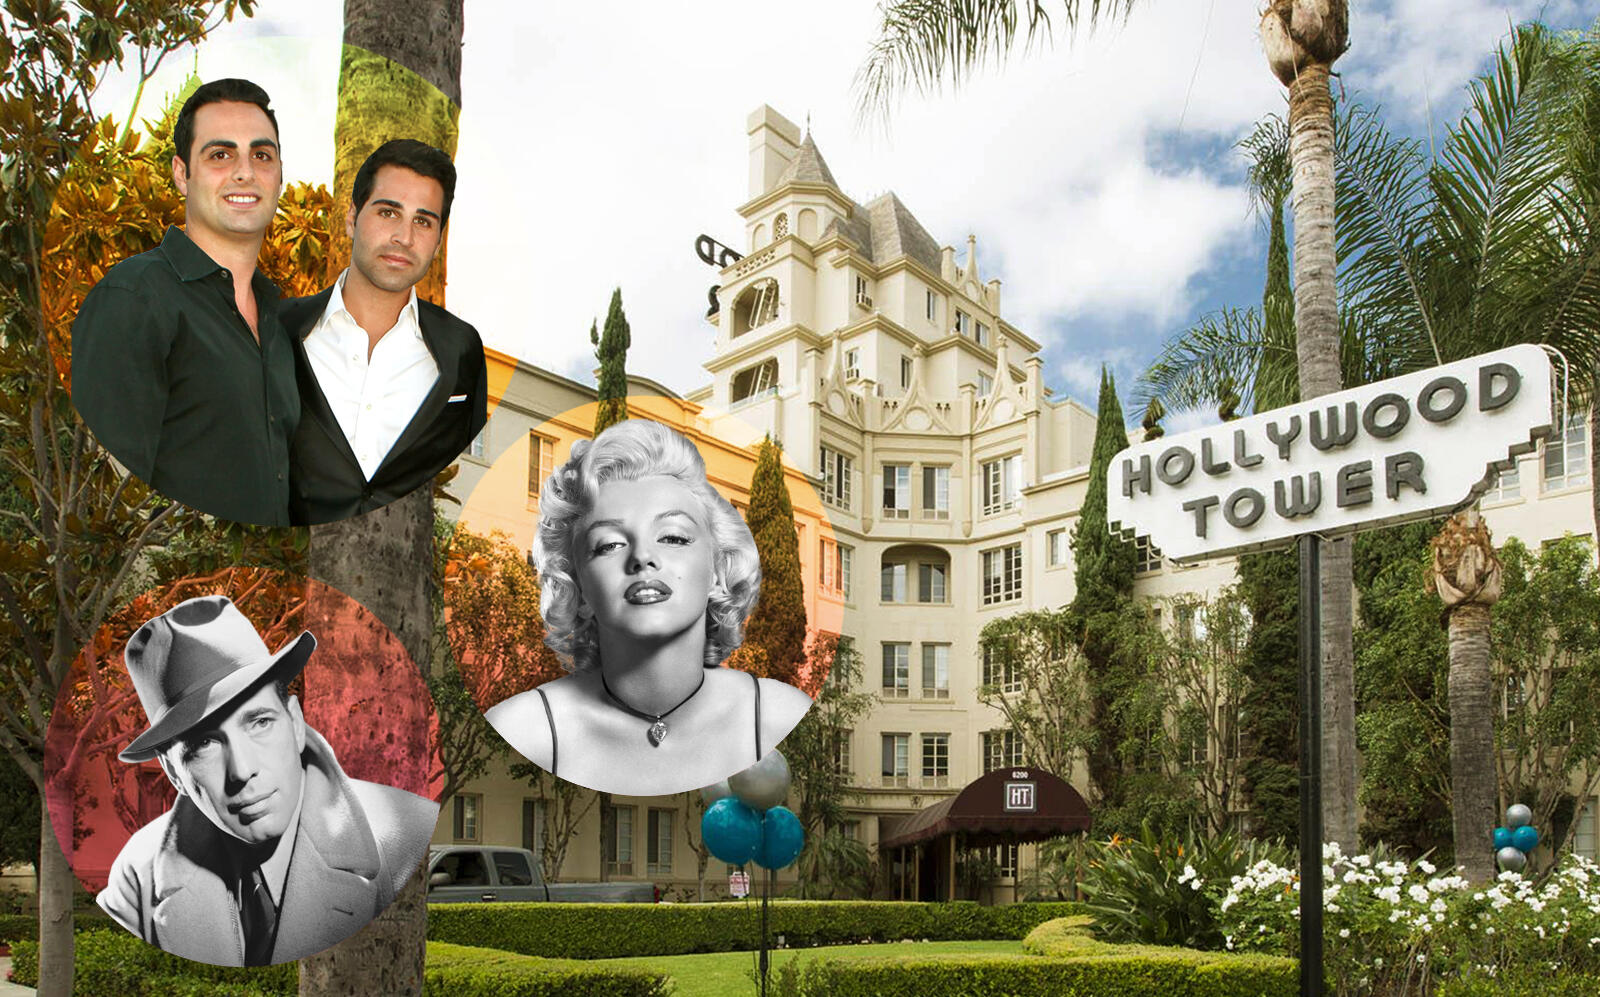 Steven and Alex Hakim, Marilyn Monroe and Humphrey Bogart with Hollywood Tower (Getty, Facebook via Hollywood Tower)